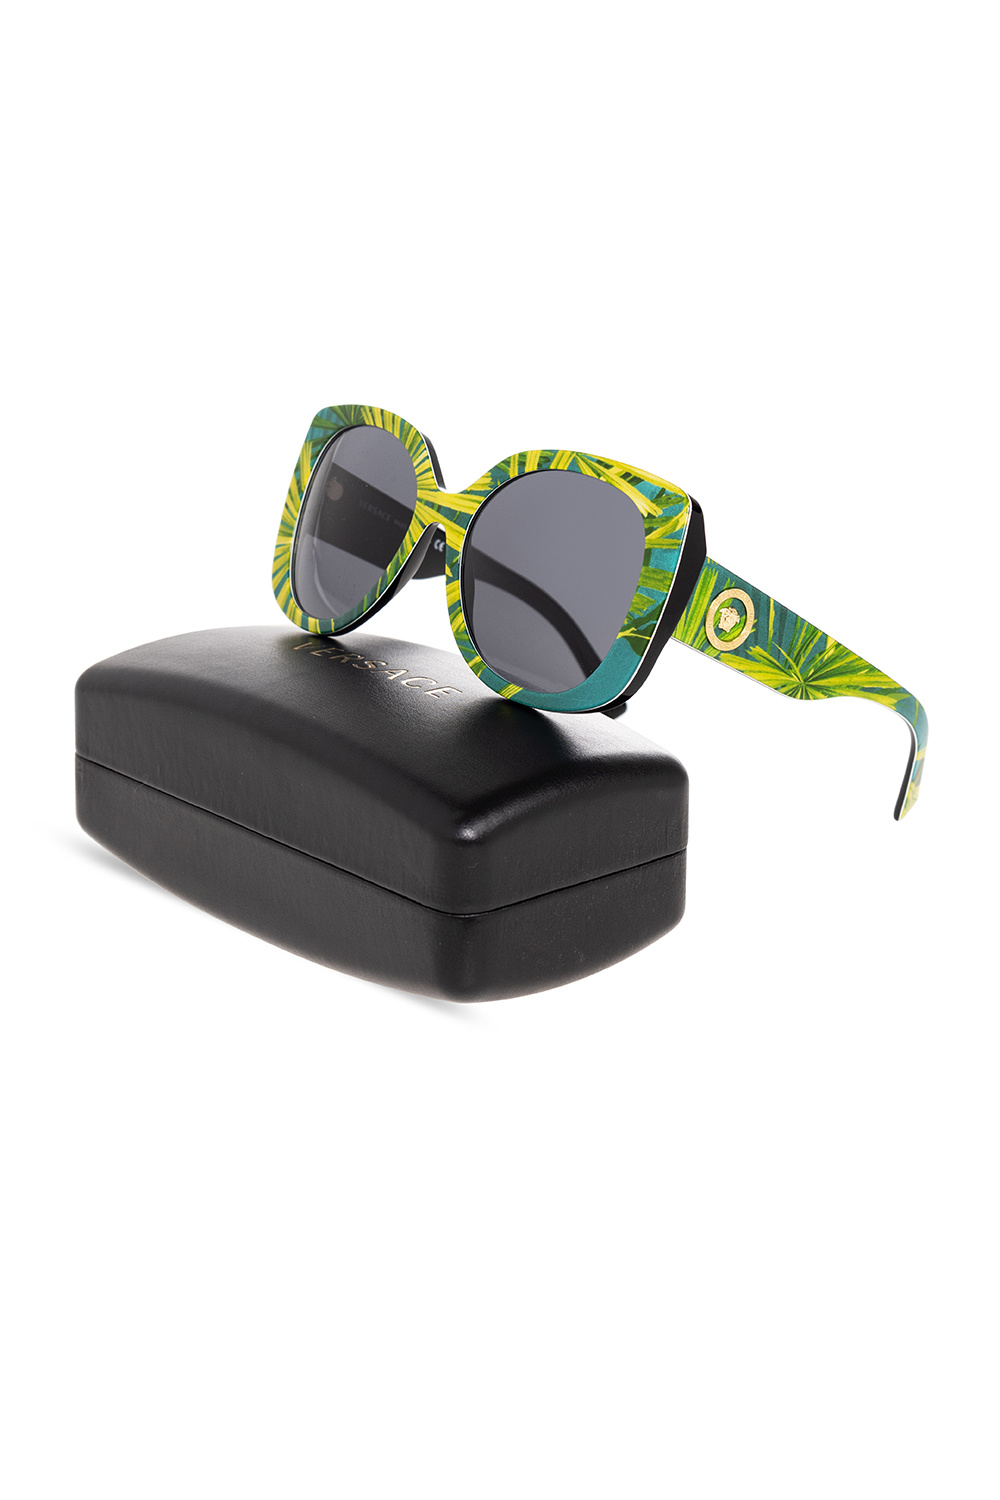 Versace Spitfire Teddy Boy unisex round Sport sunglasses in clear with blue mirrored lens